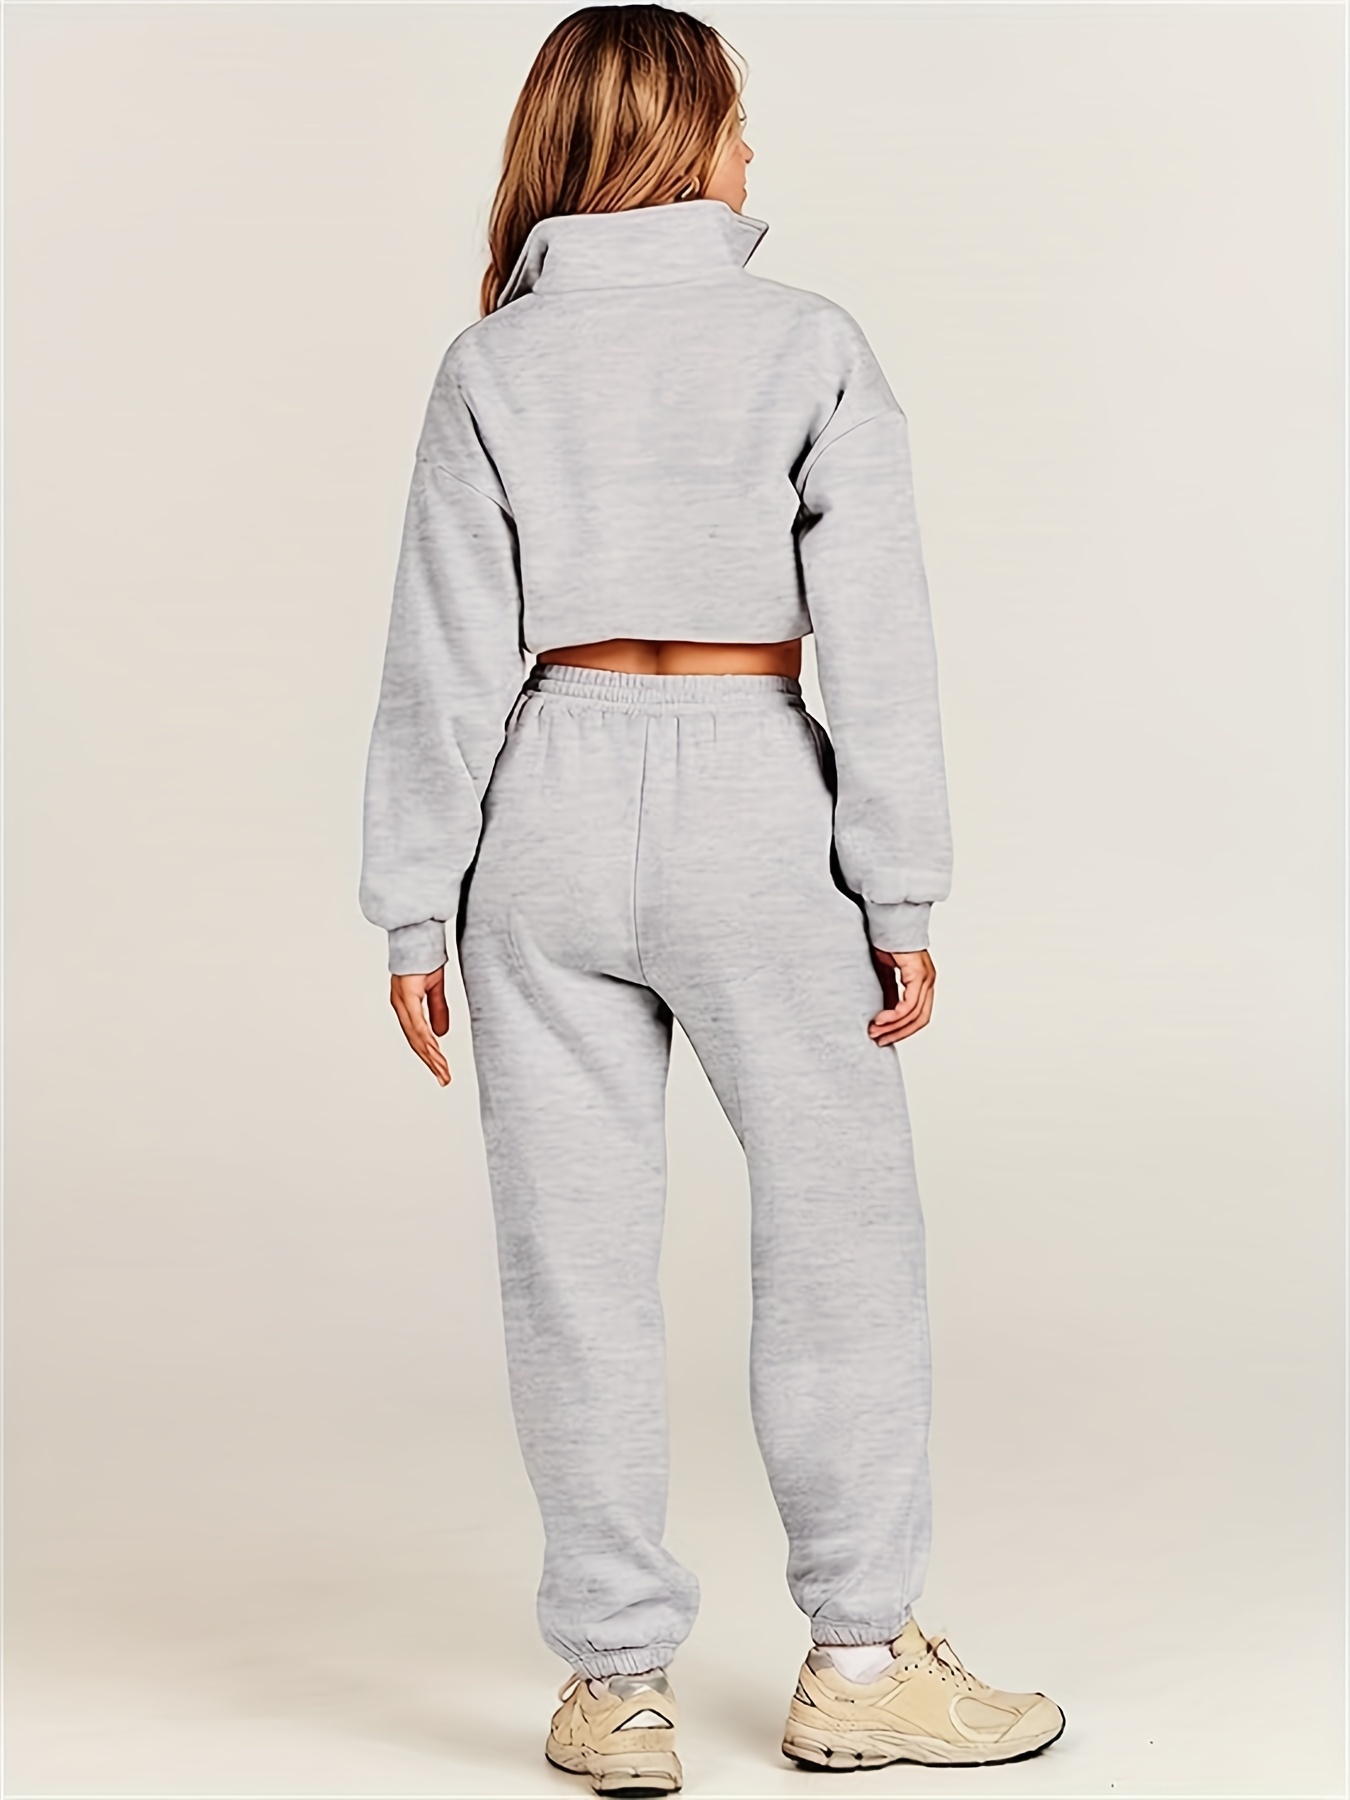 JDEFEG Cotton Sweatsuits Womens Autumn and Winter Loose Top Solid